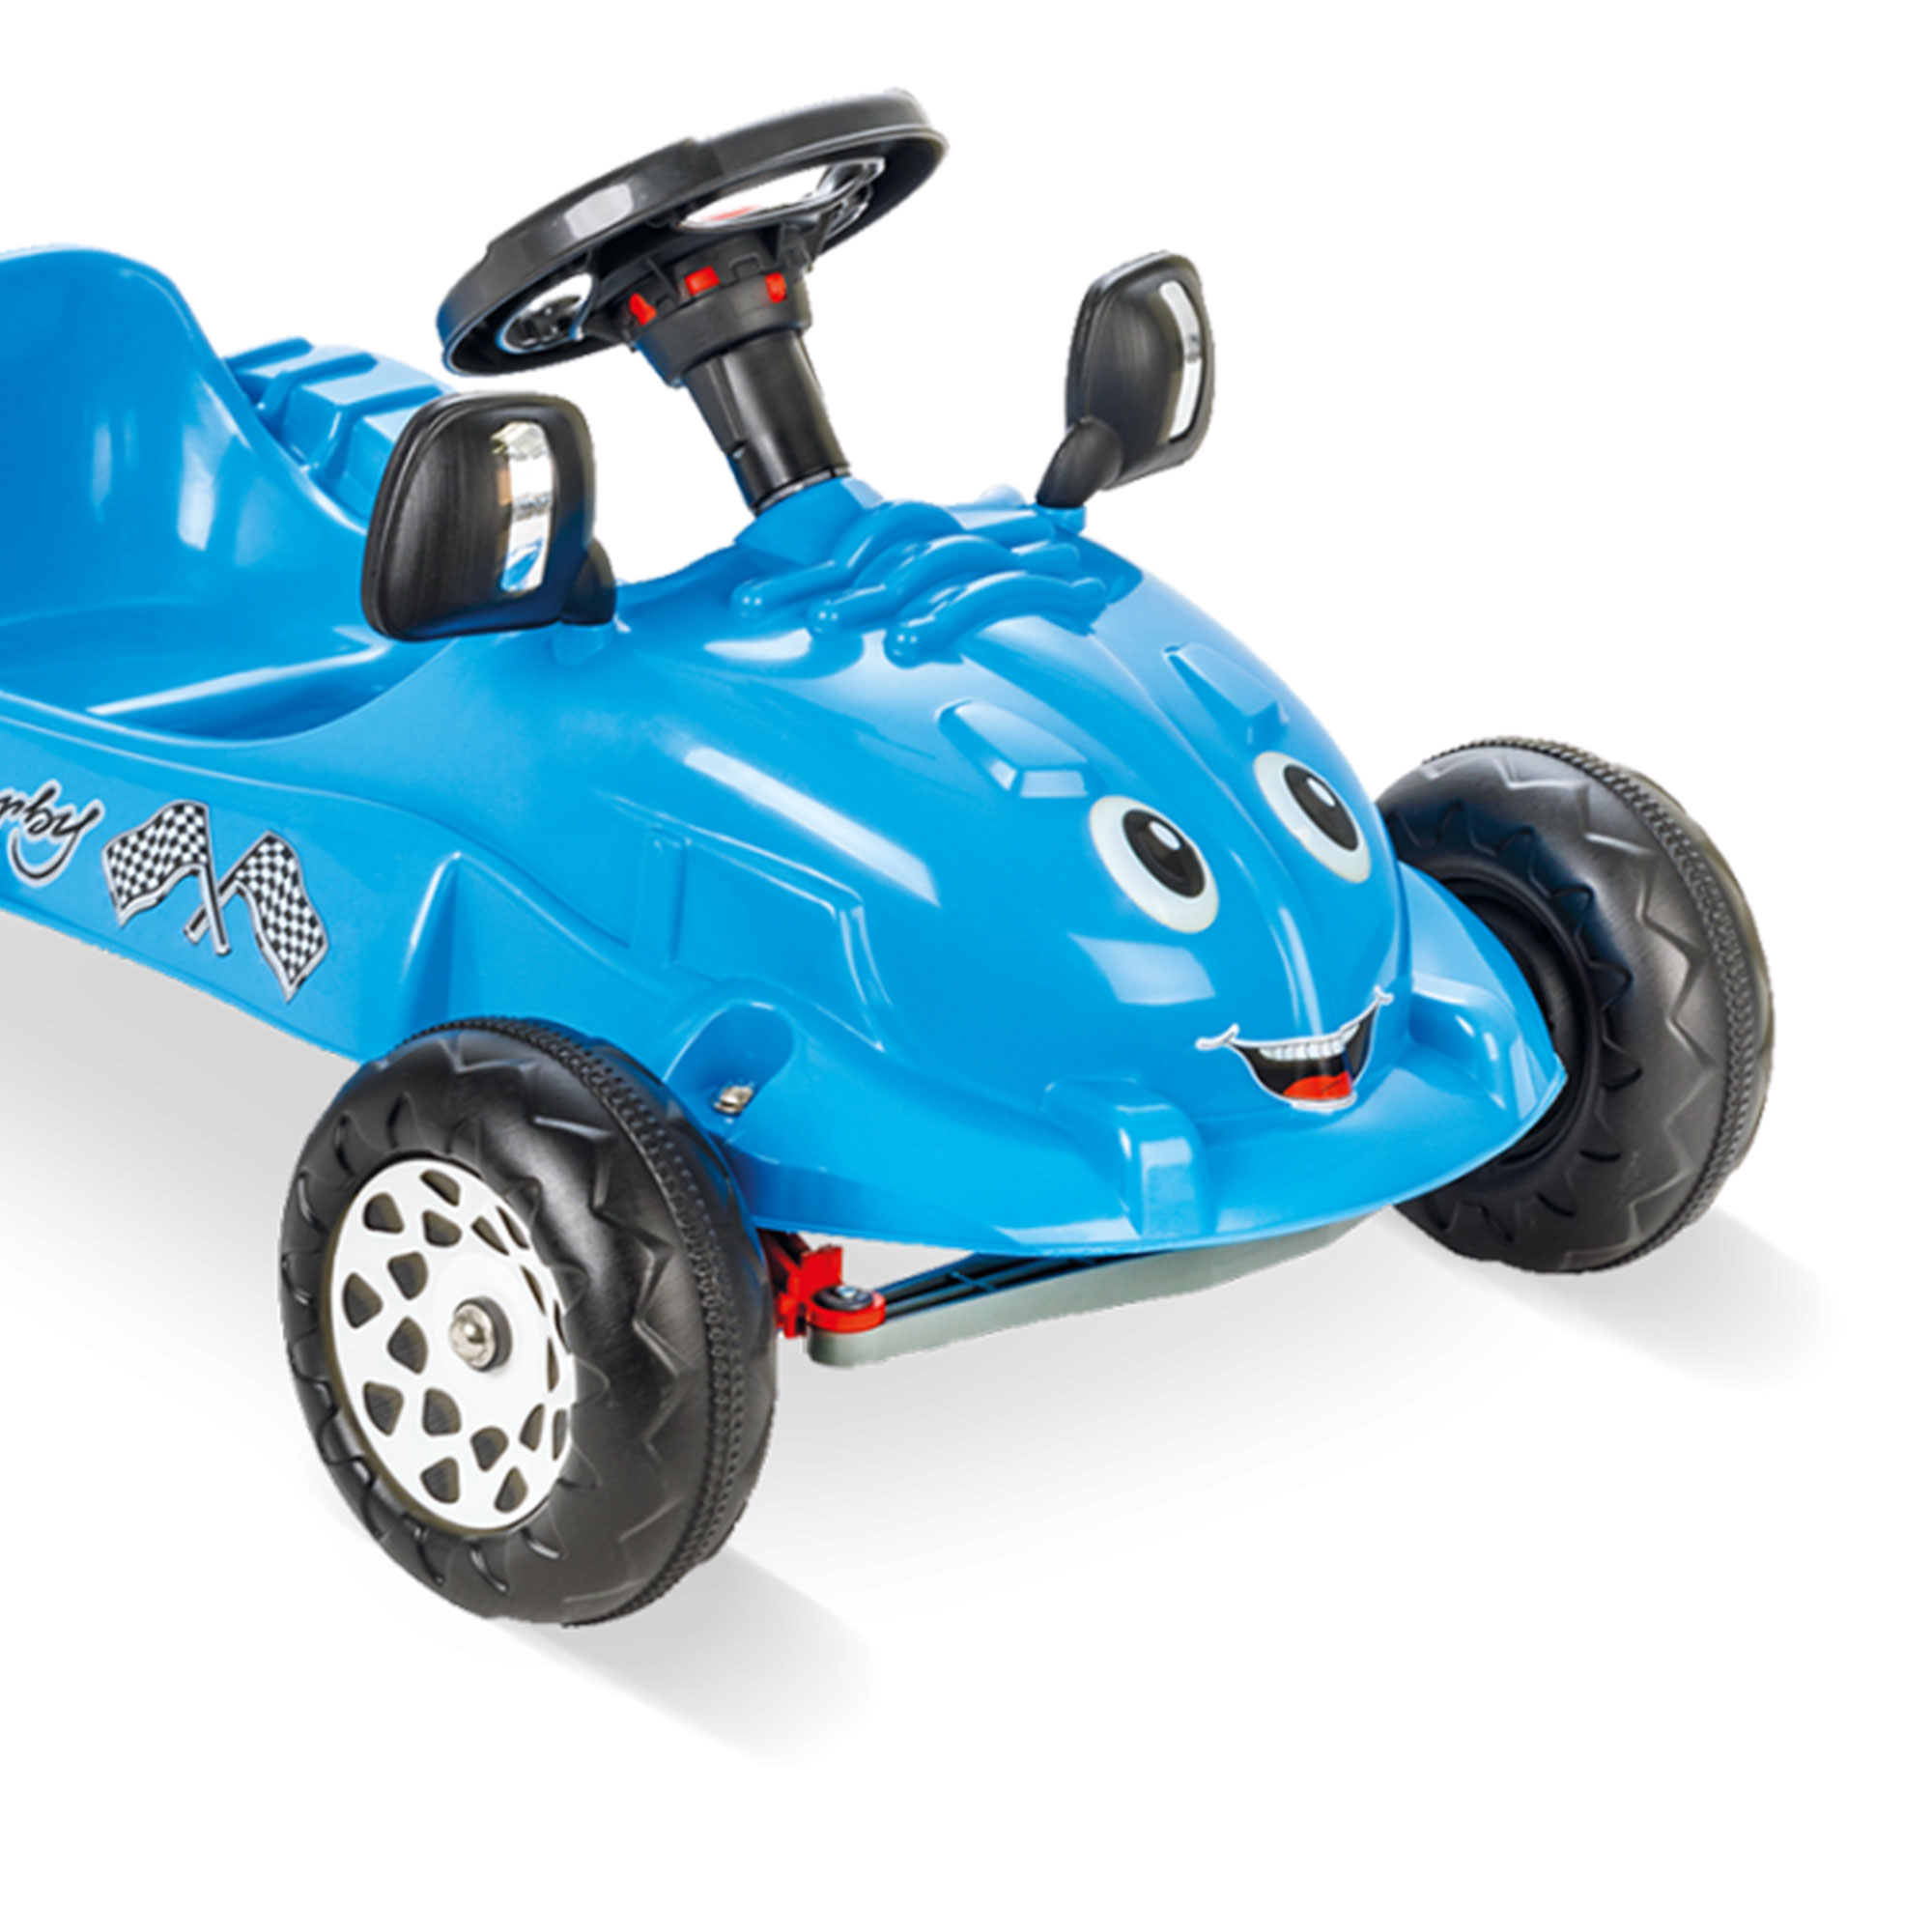 Pilsan Herby Pedal Car w/ Moving Mirrors and Horn for Ages 3 & Up, Blue - image 3 of 5